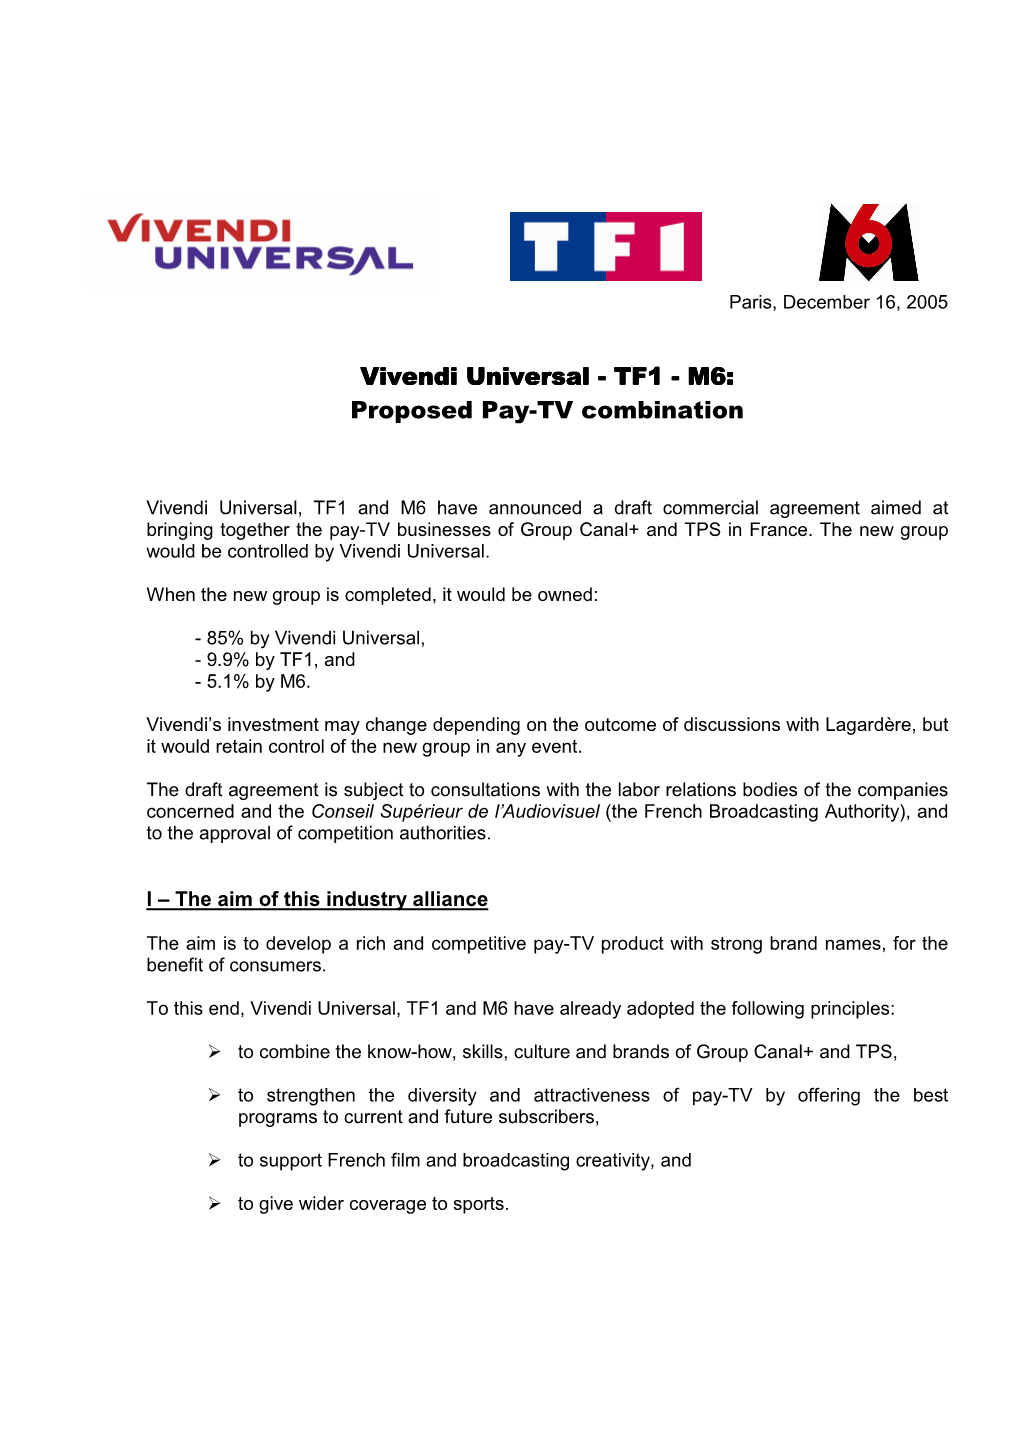 TF1 --- M6M6:::: Proposed Pay-TV Combination